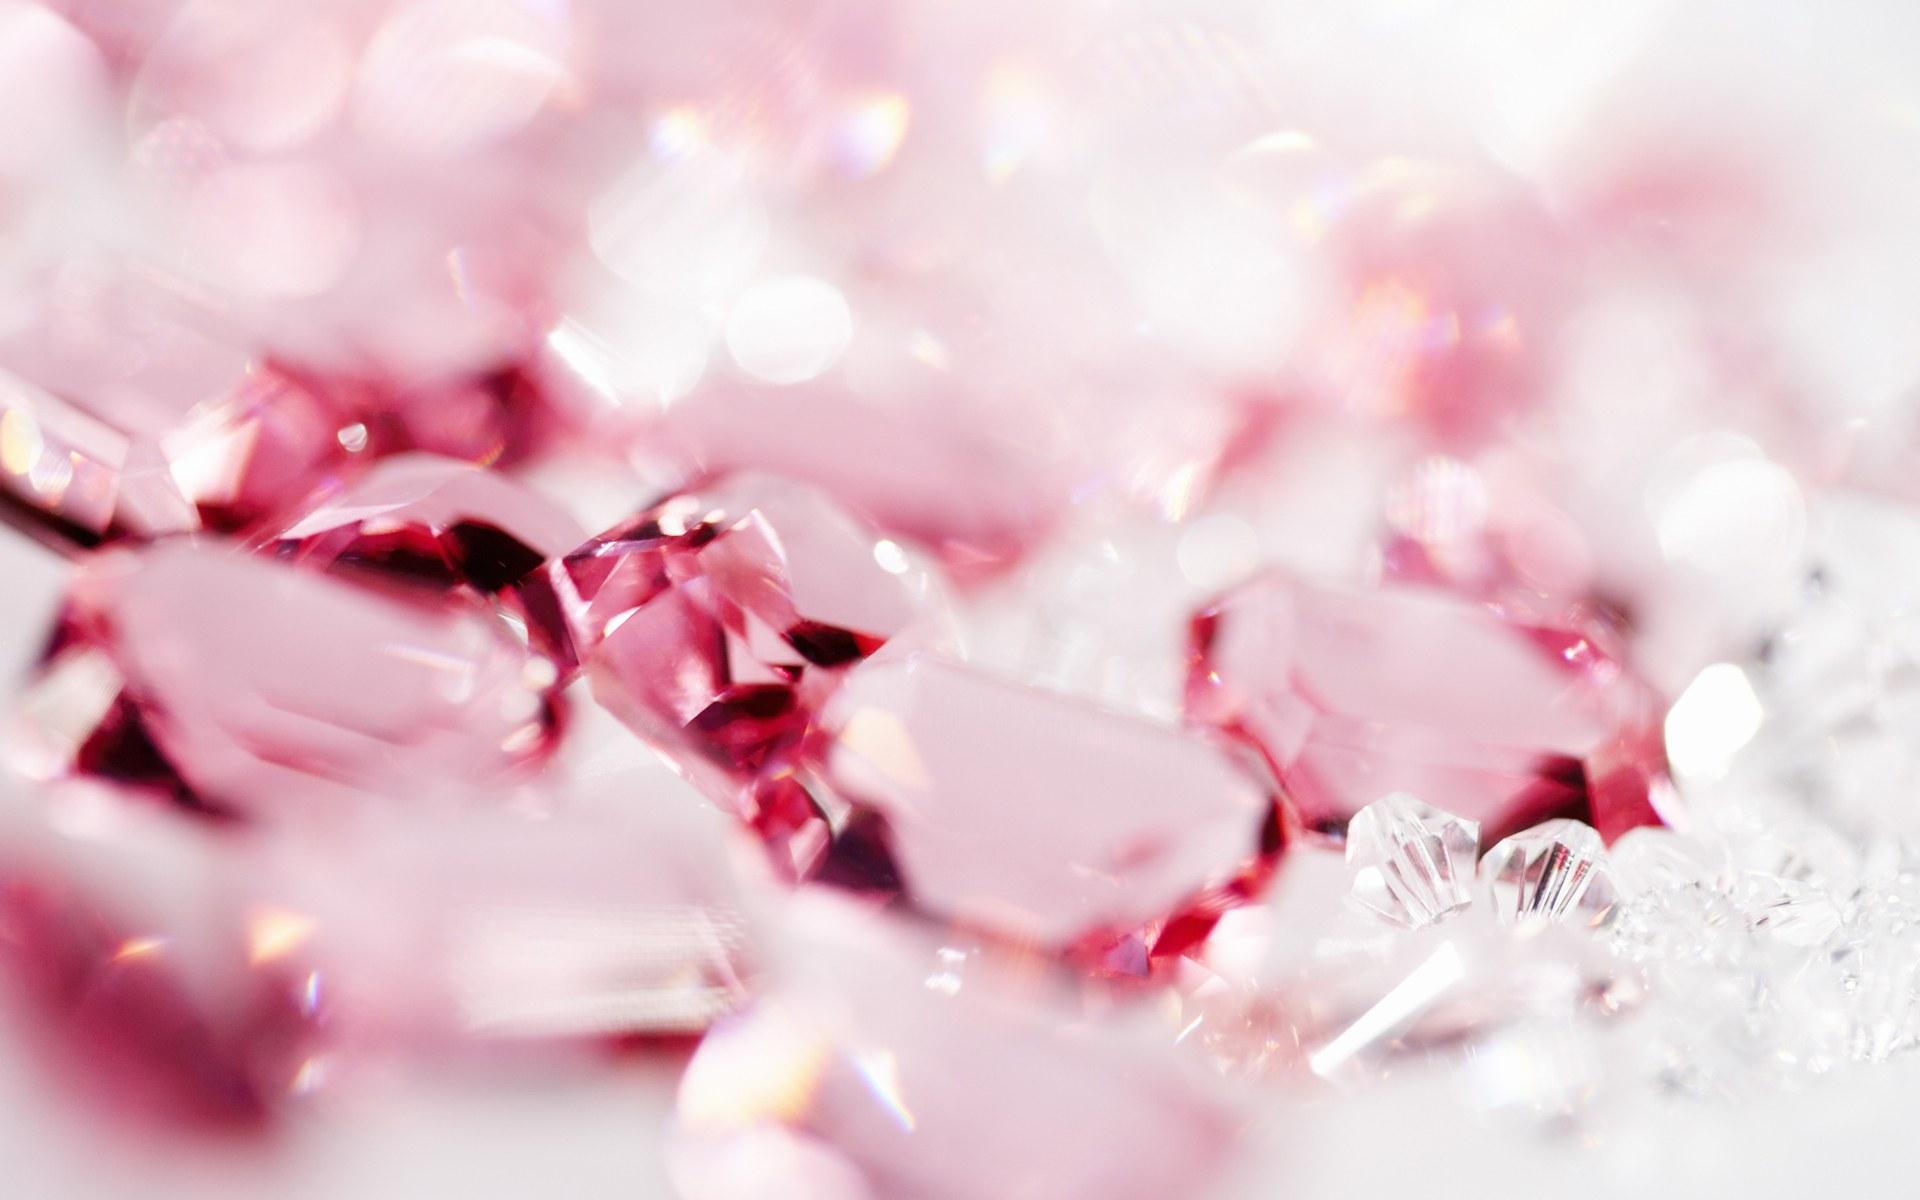 Pin Sparkling And Romantic 1920x1200 Wallpapers